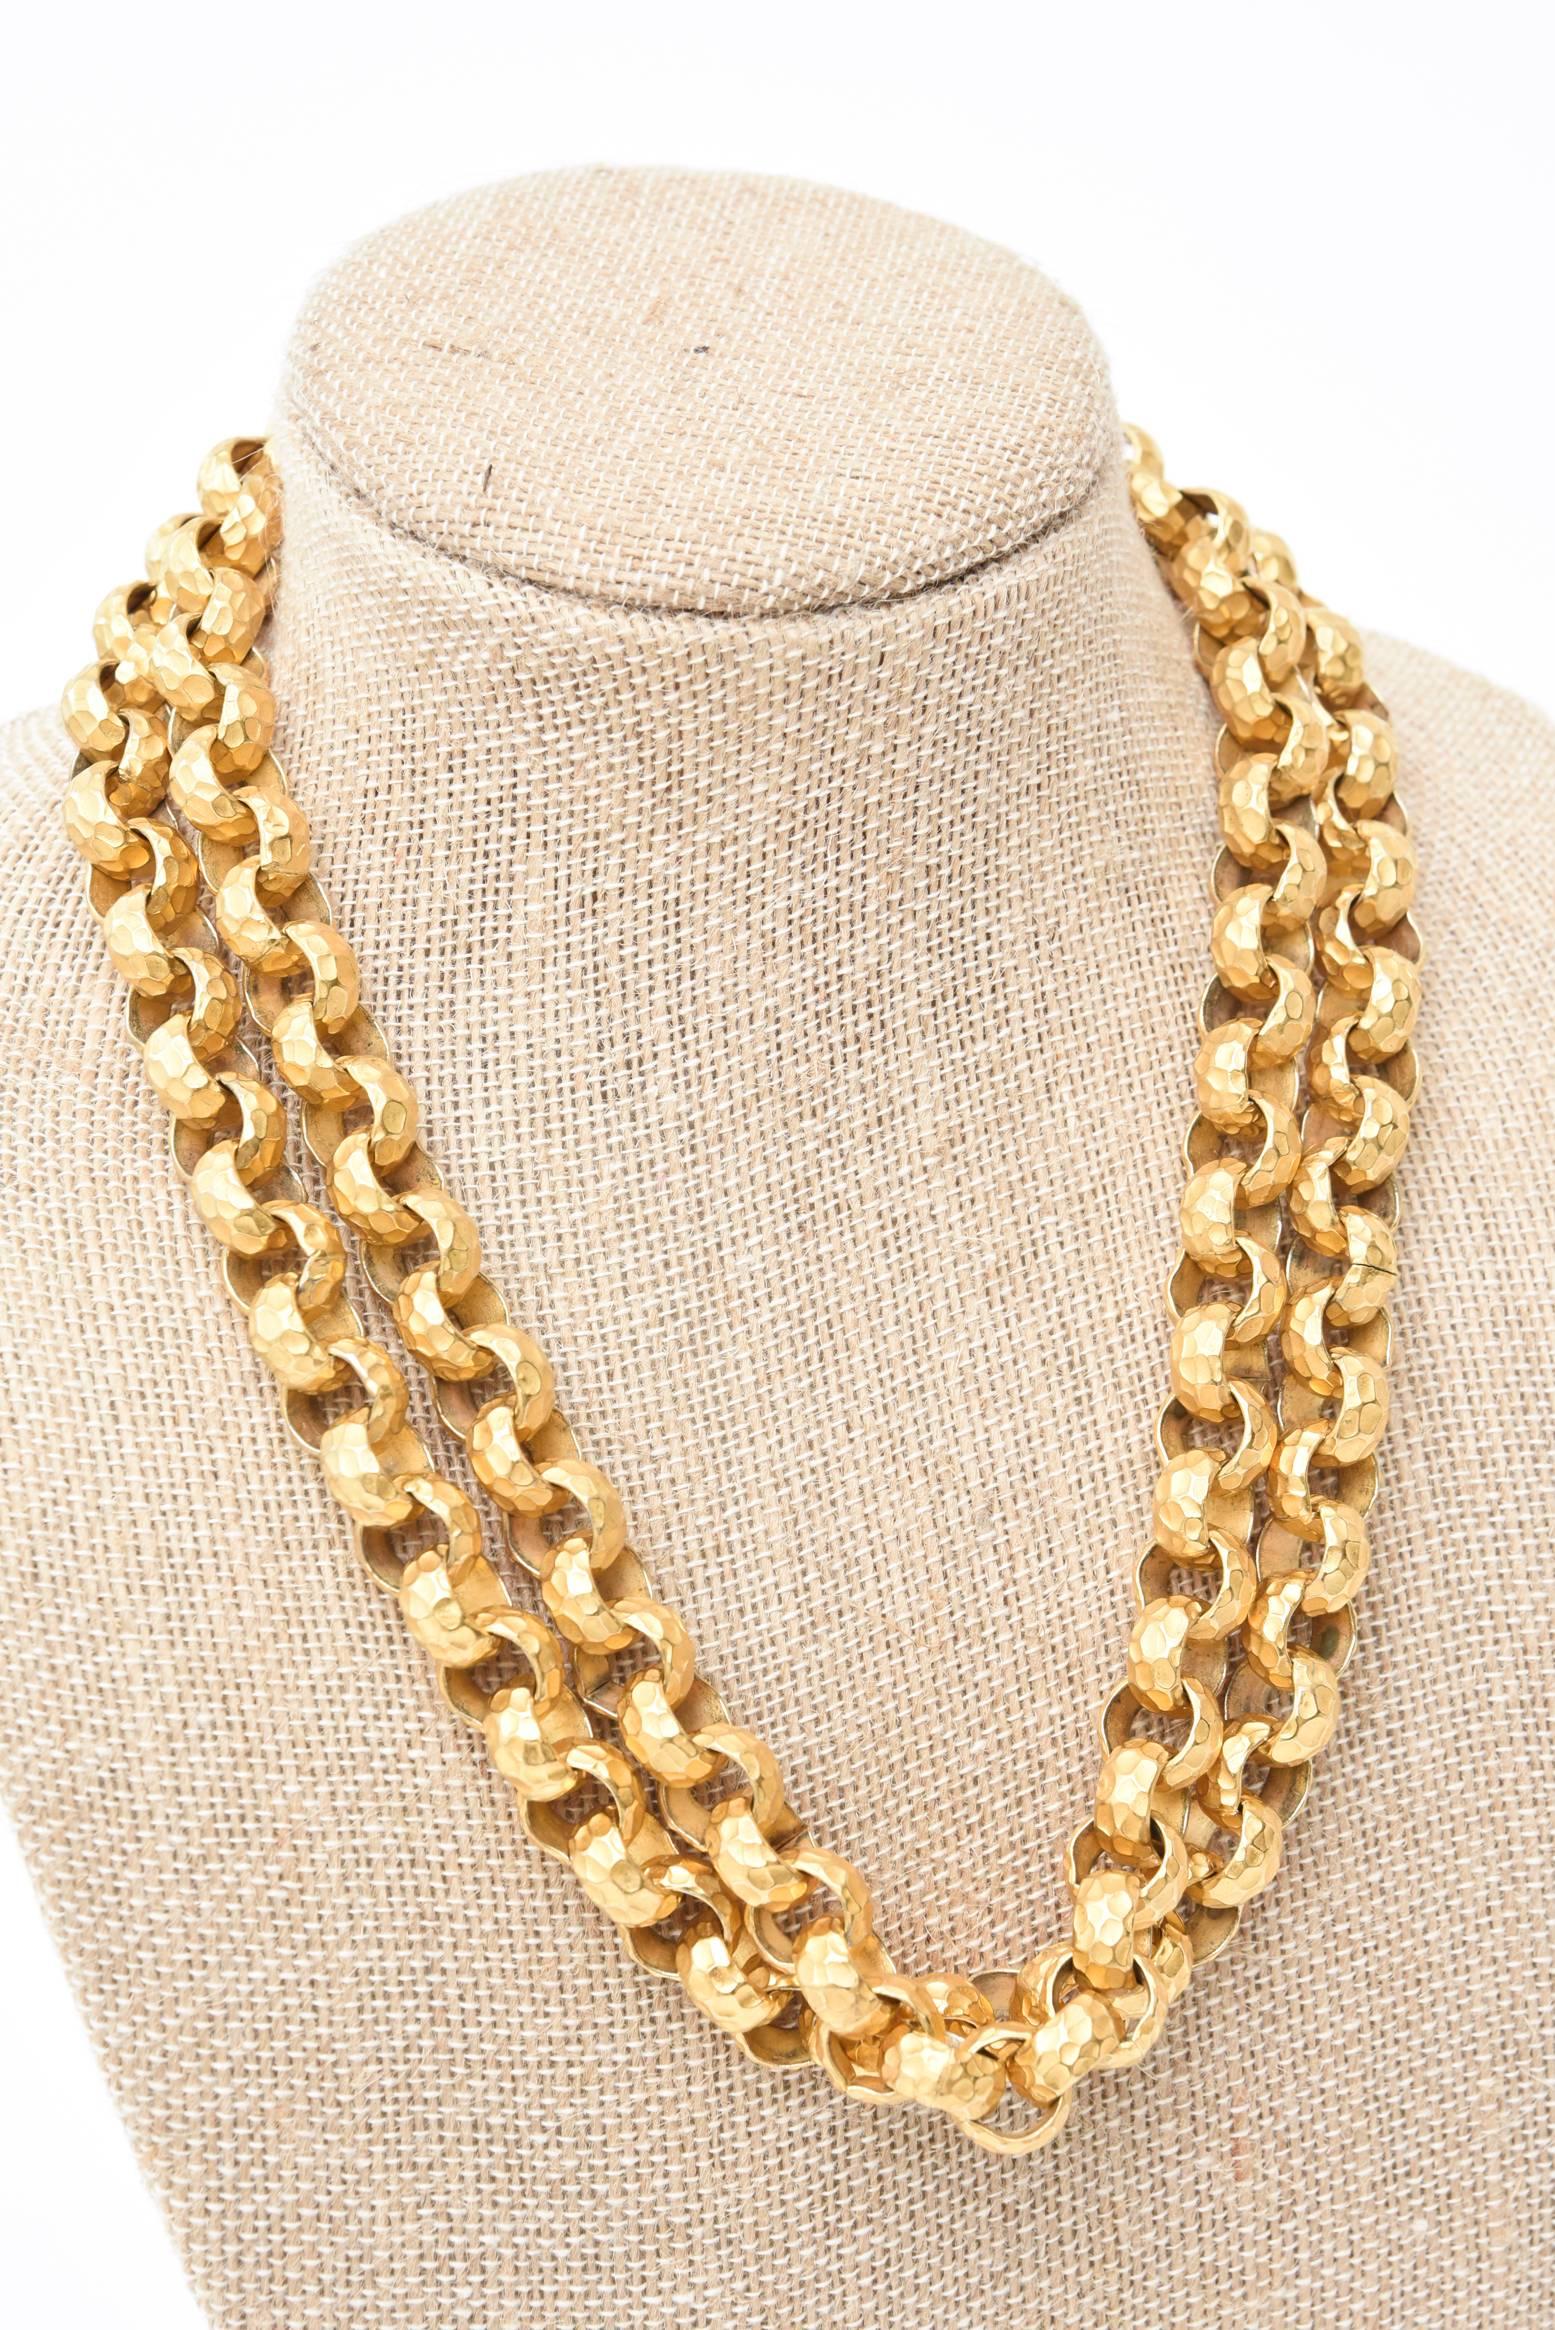 Gold Plated Double Link Chain Necklace Vintage 1